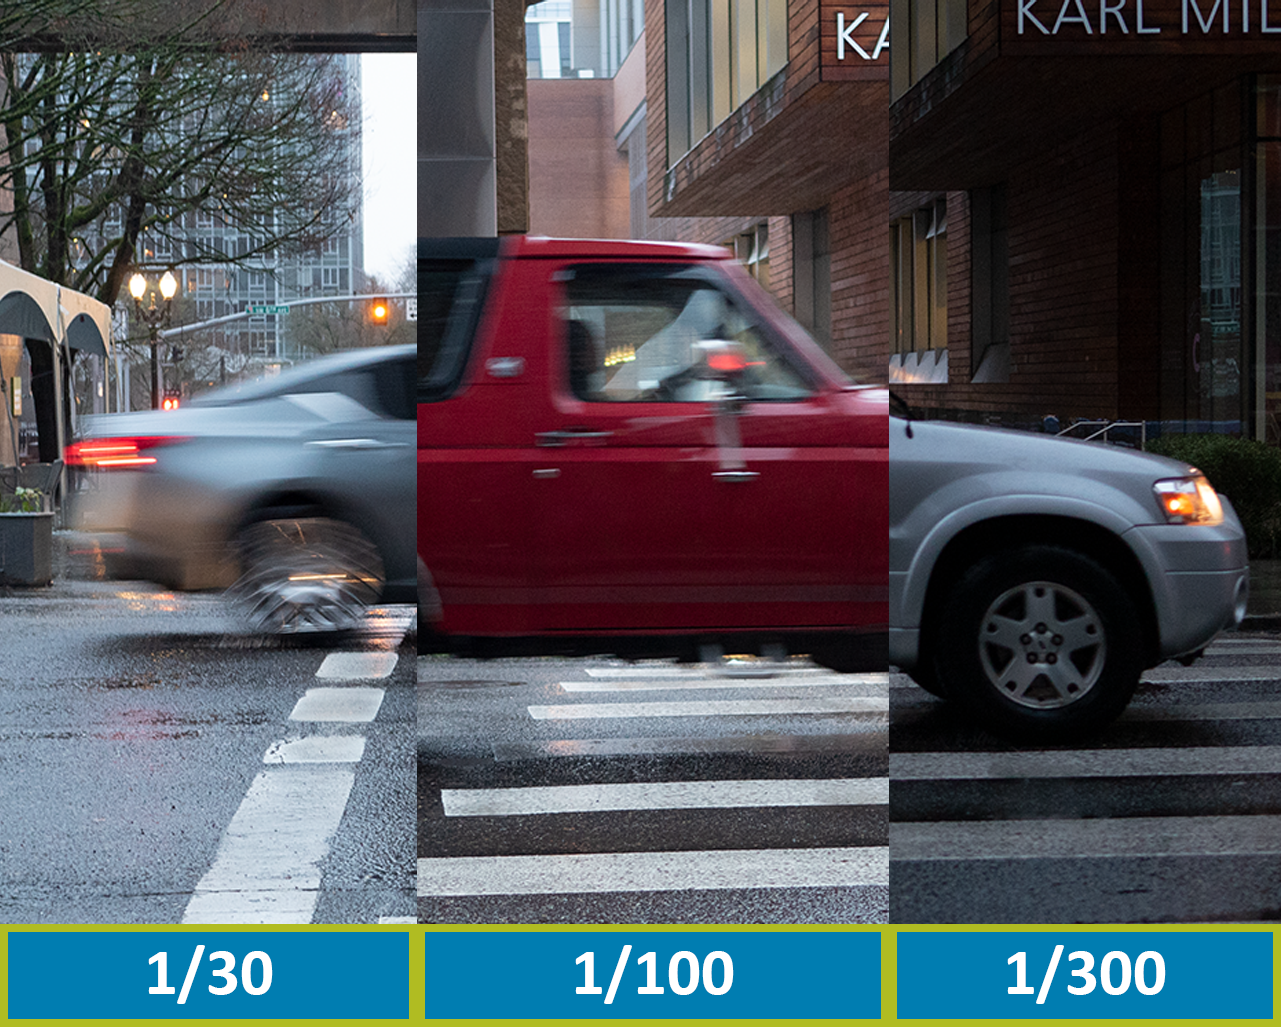 a series of car images showing that increased shutter speed leads to less motion blur in photos